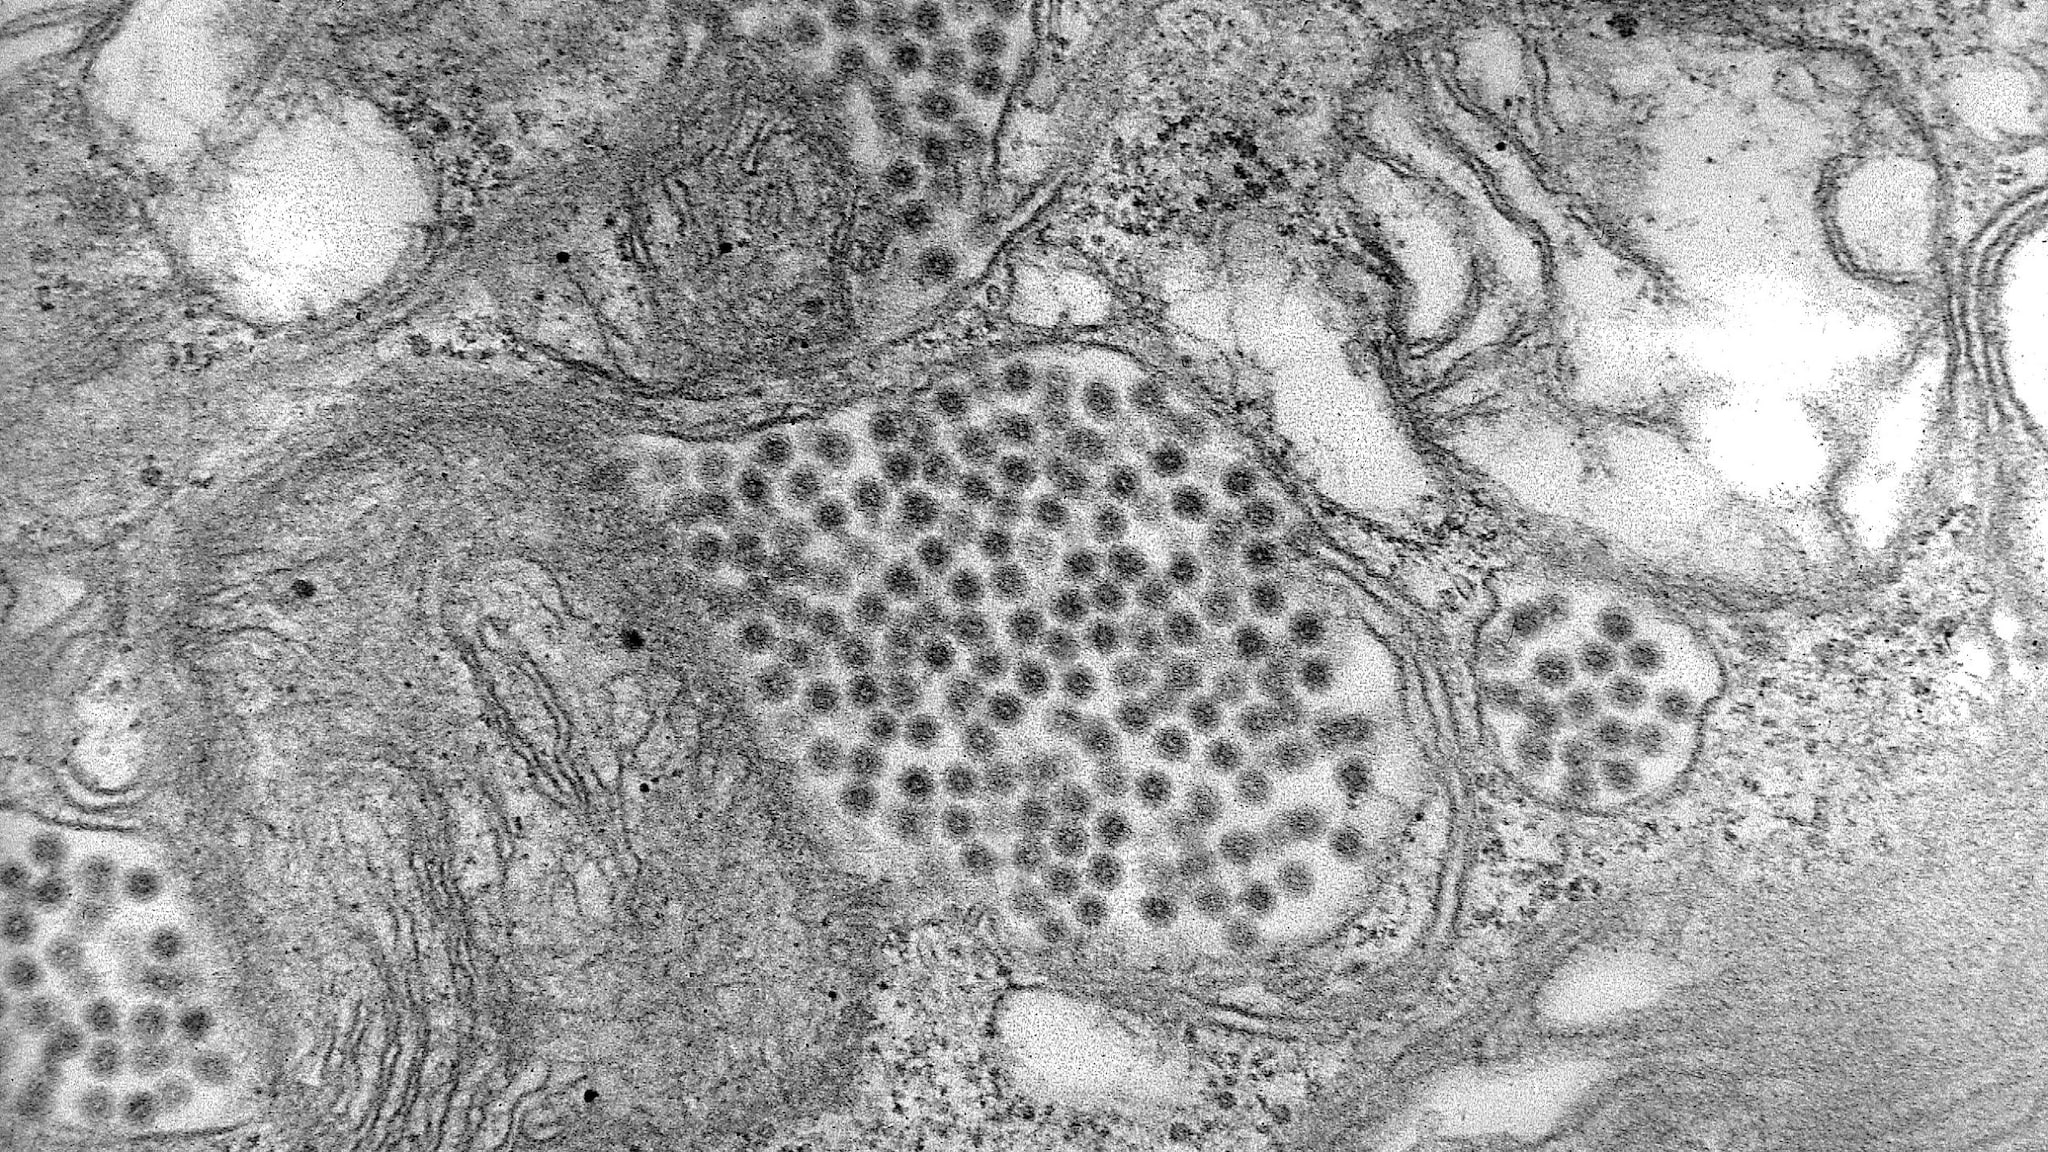 Electron microscopic image of eastern equine encephalitis virus particles in mosquito salivary gland tissue.